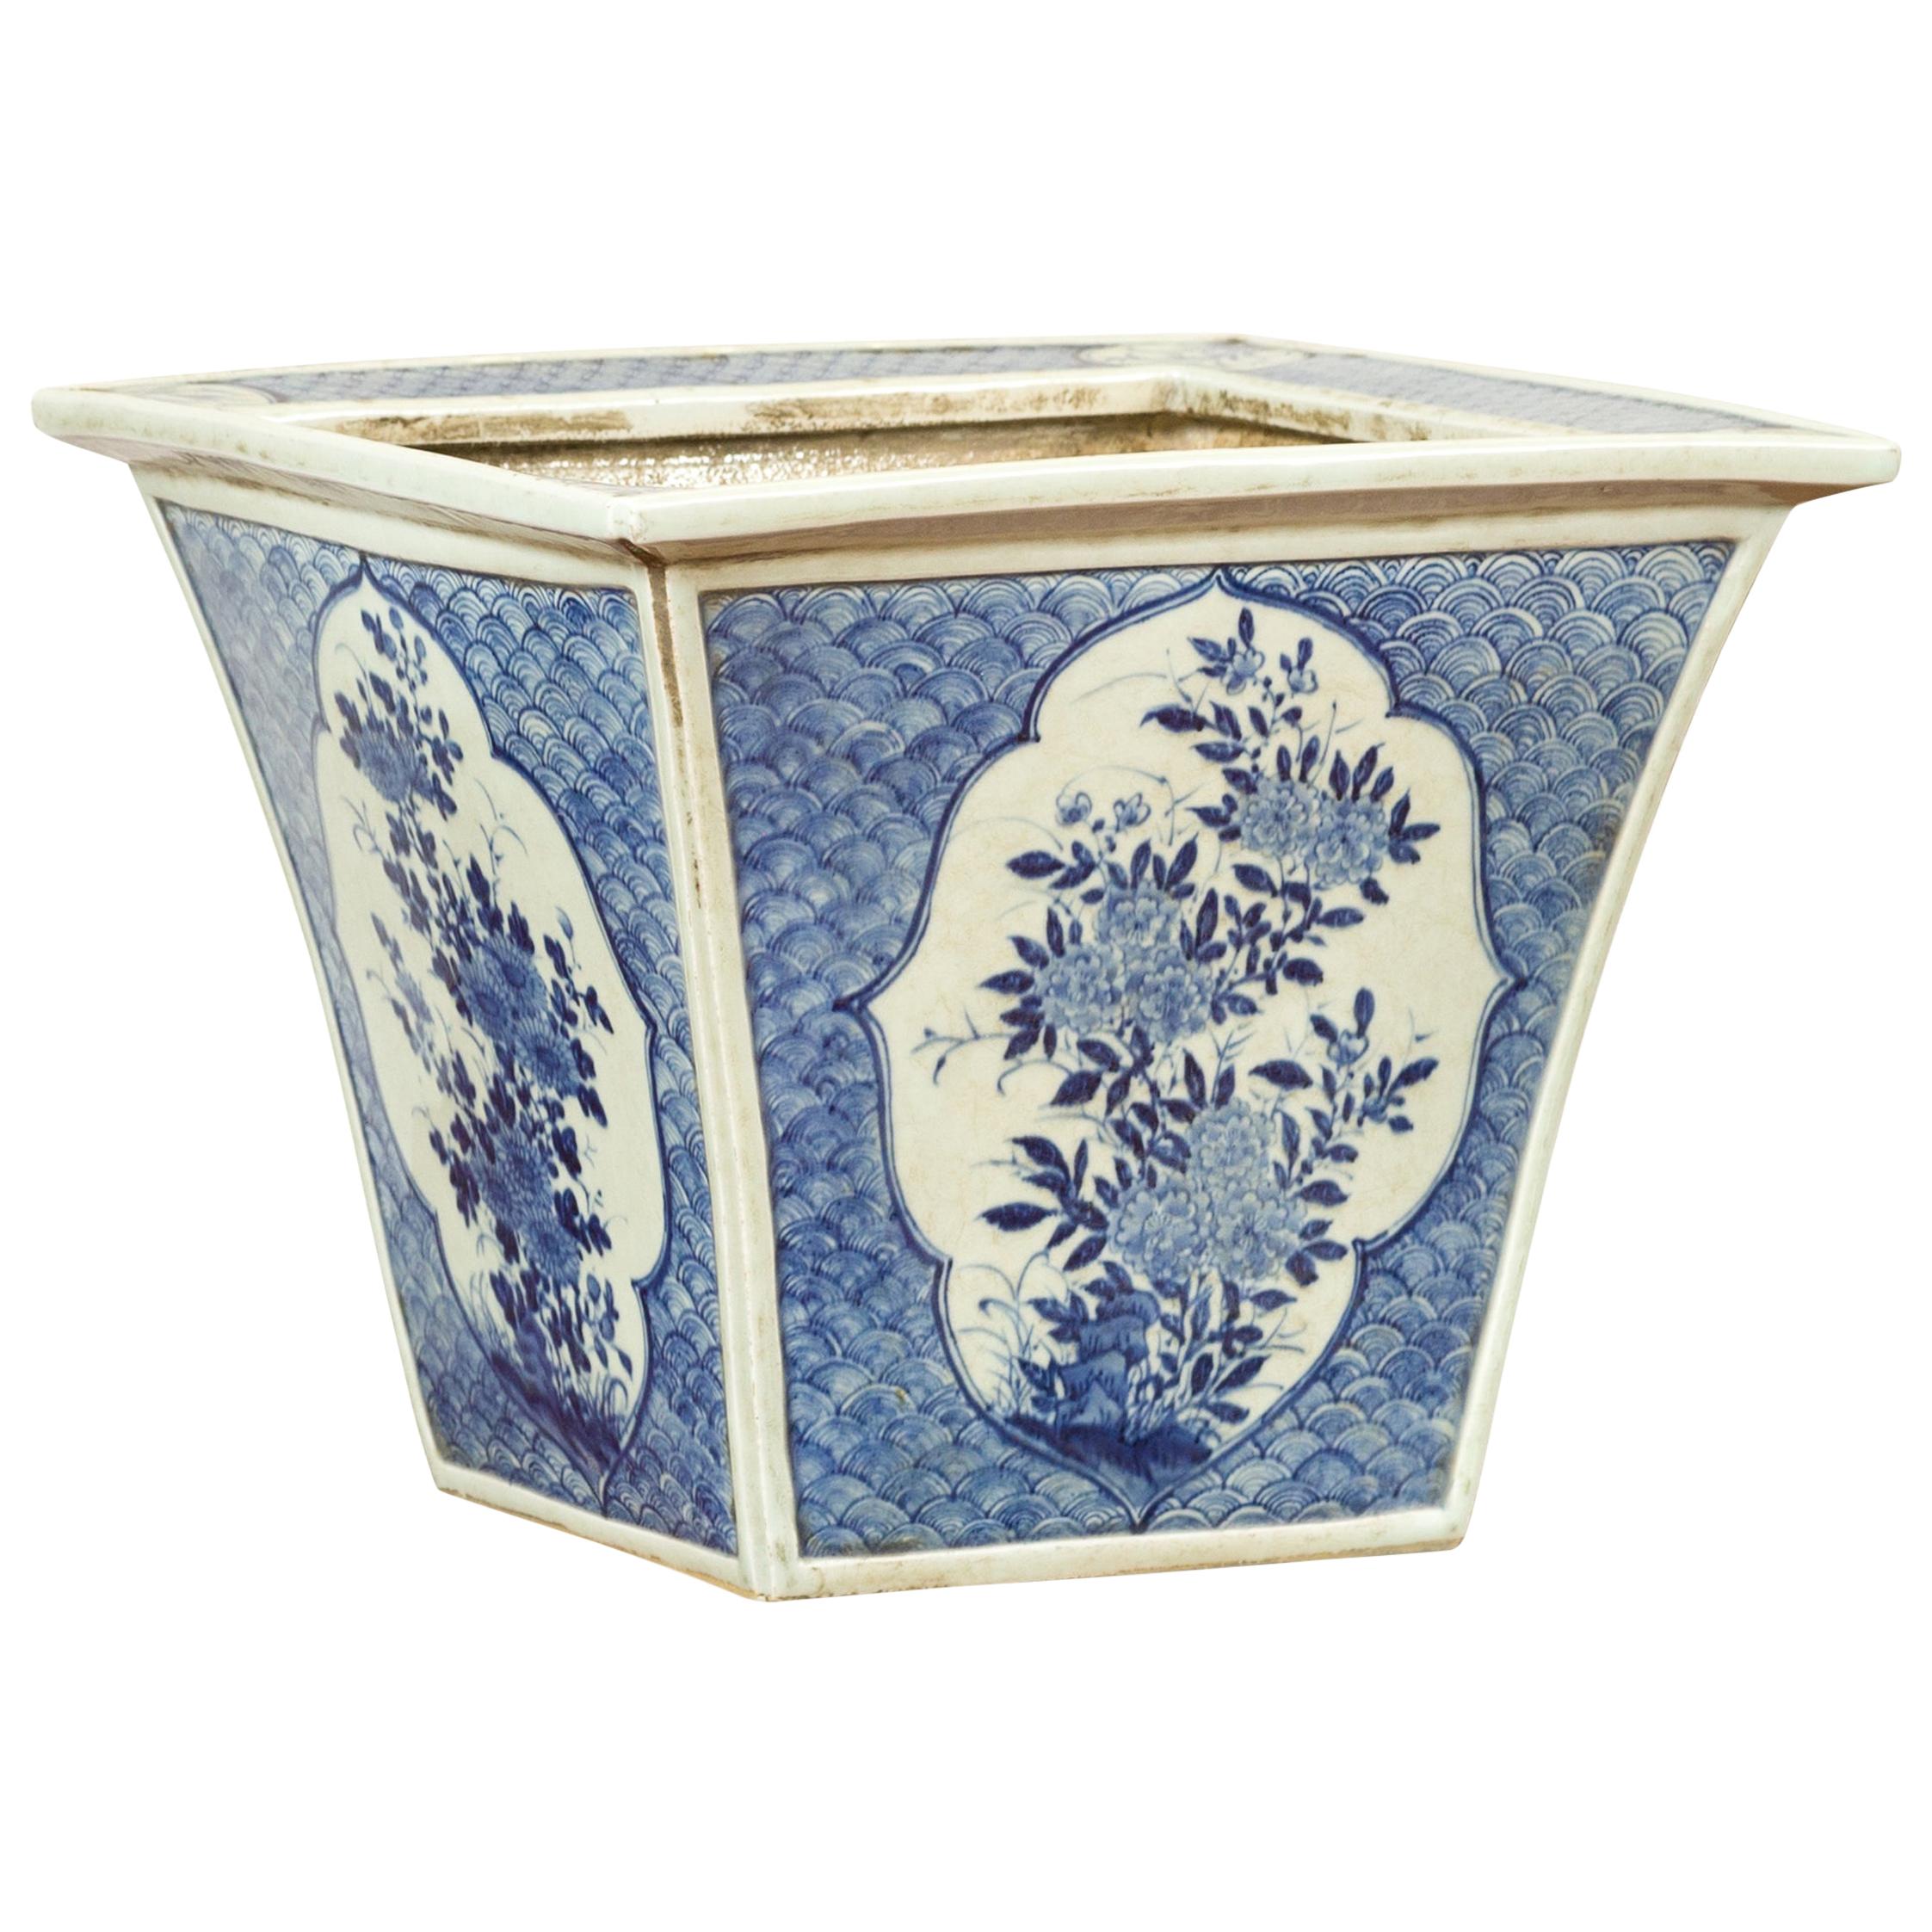 Chinese 19th Century Qing Dynasty Blue and White Planter with Floral Décor